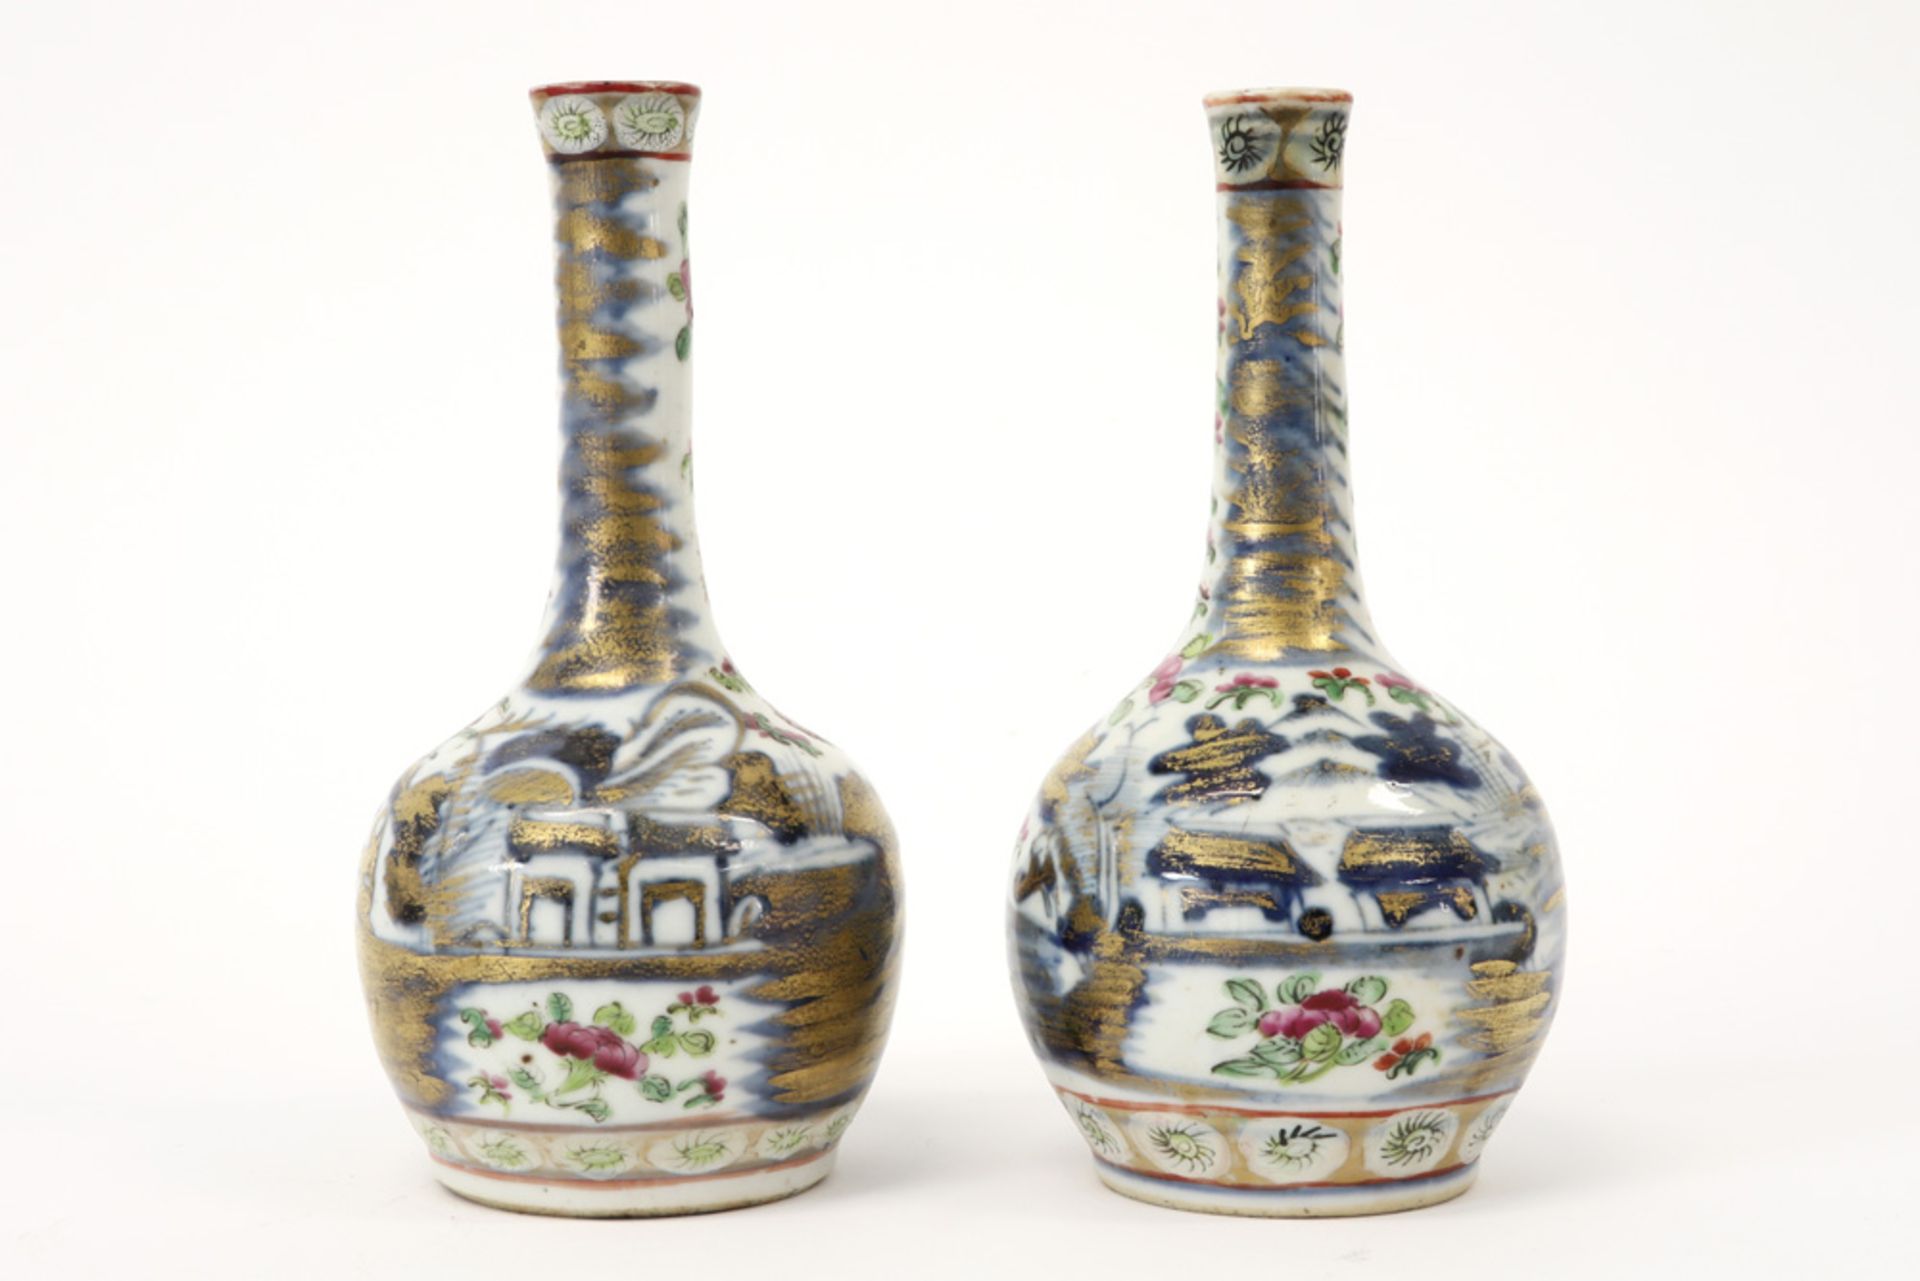 pair of 19th Cent. Chinese vases in porcelain with a blue-white and Cantonese decor with temple - Image 2 of 4